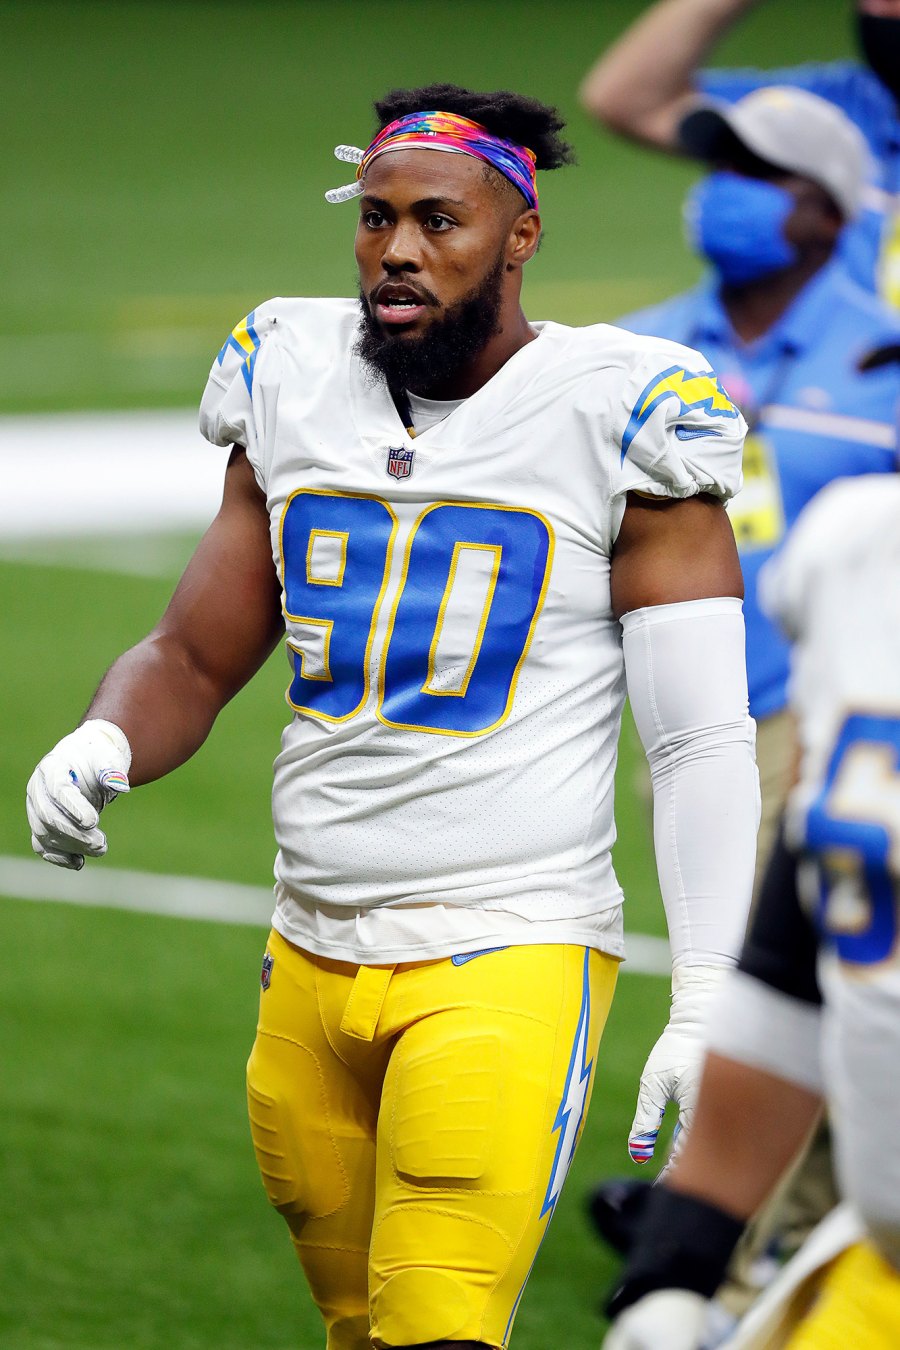 5 Things to Know About Late NFL Player Jessie Lemonier - 463 Chargers Saints Football, New Orleans, United States - 12 Oct 2020